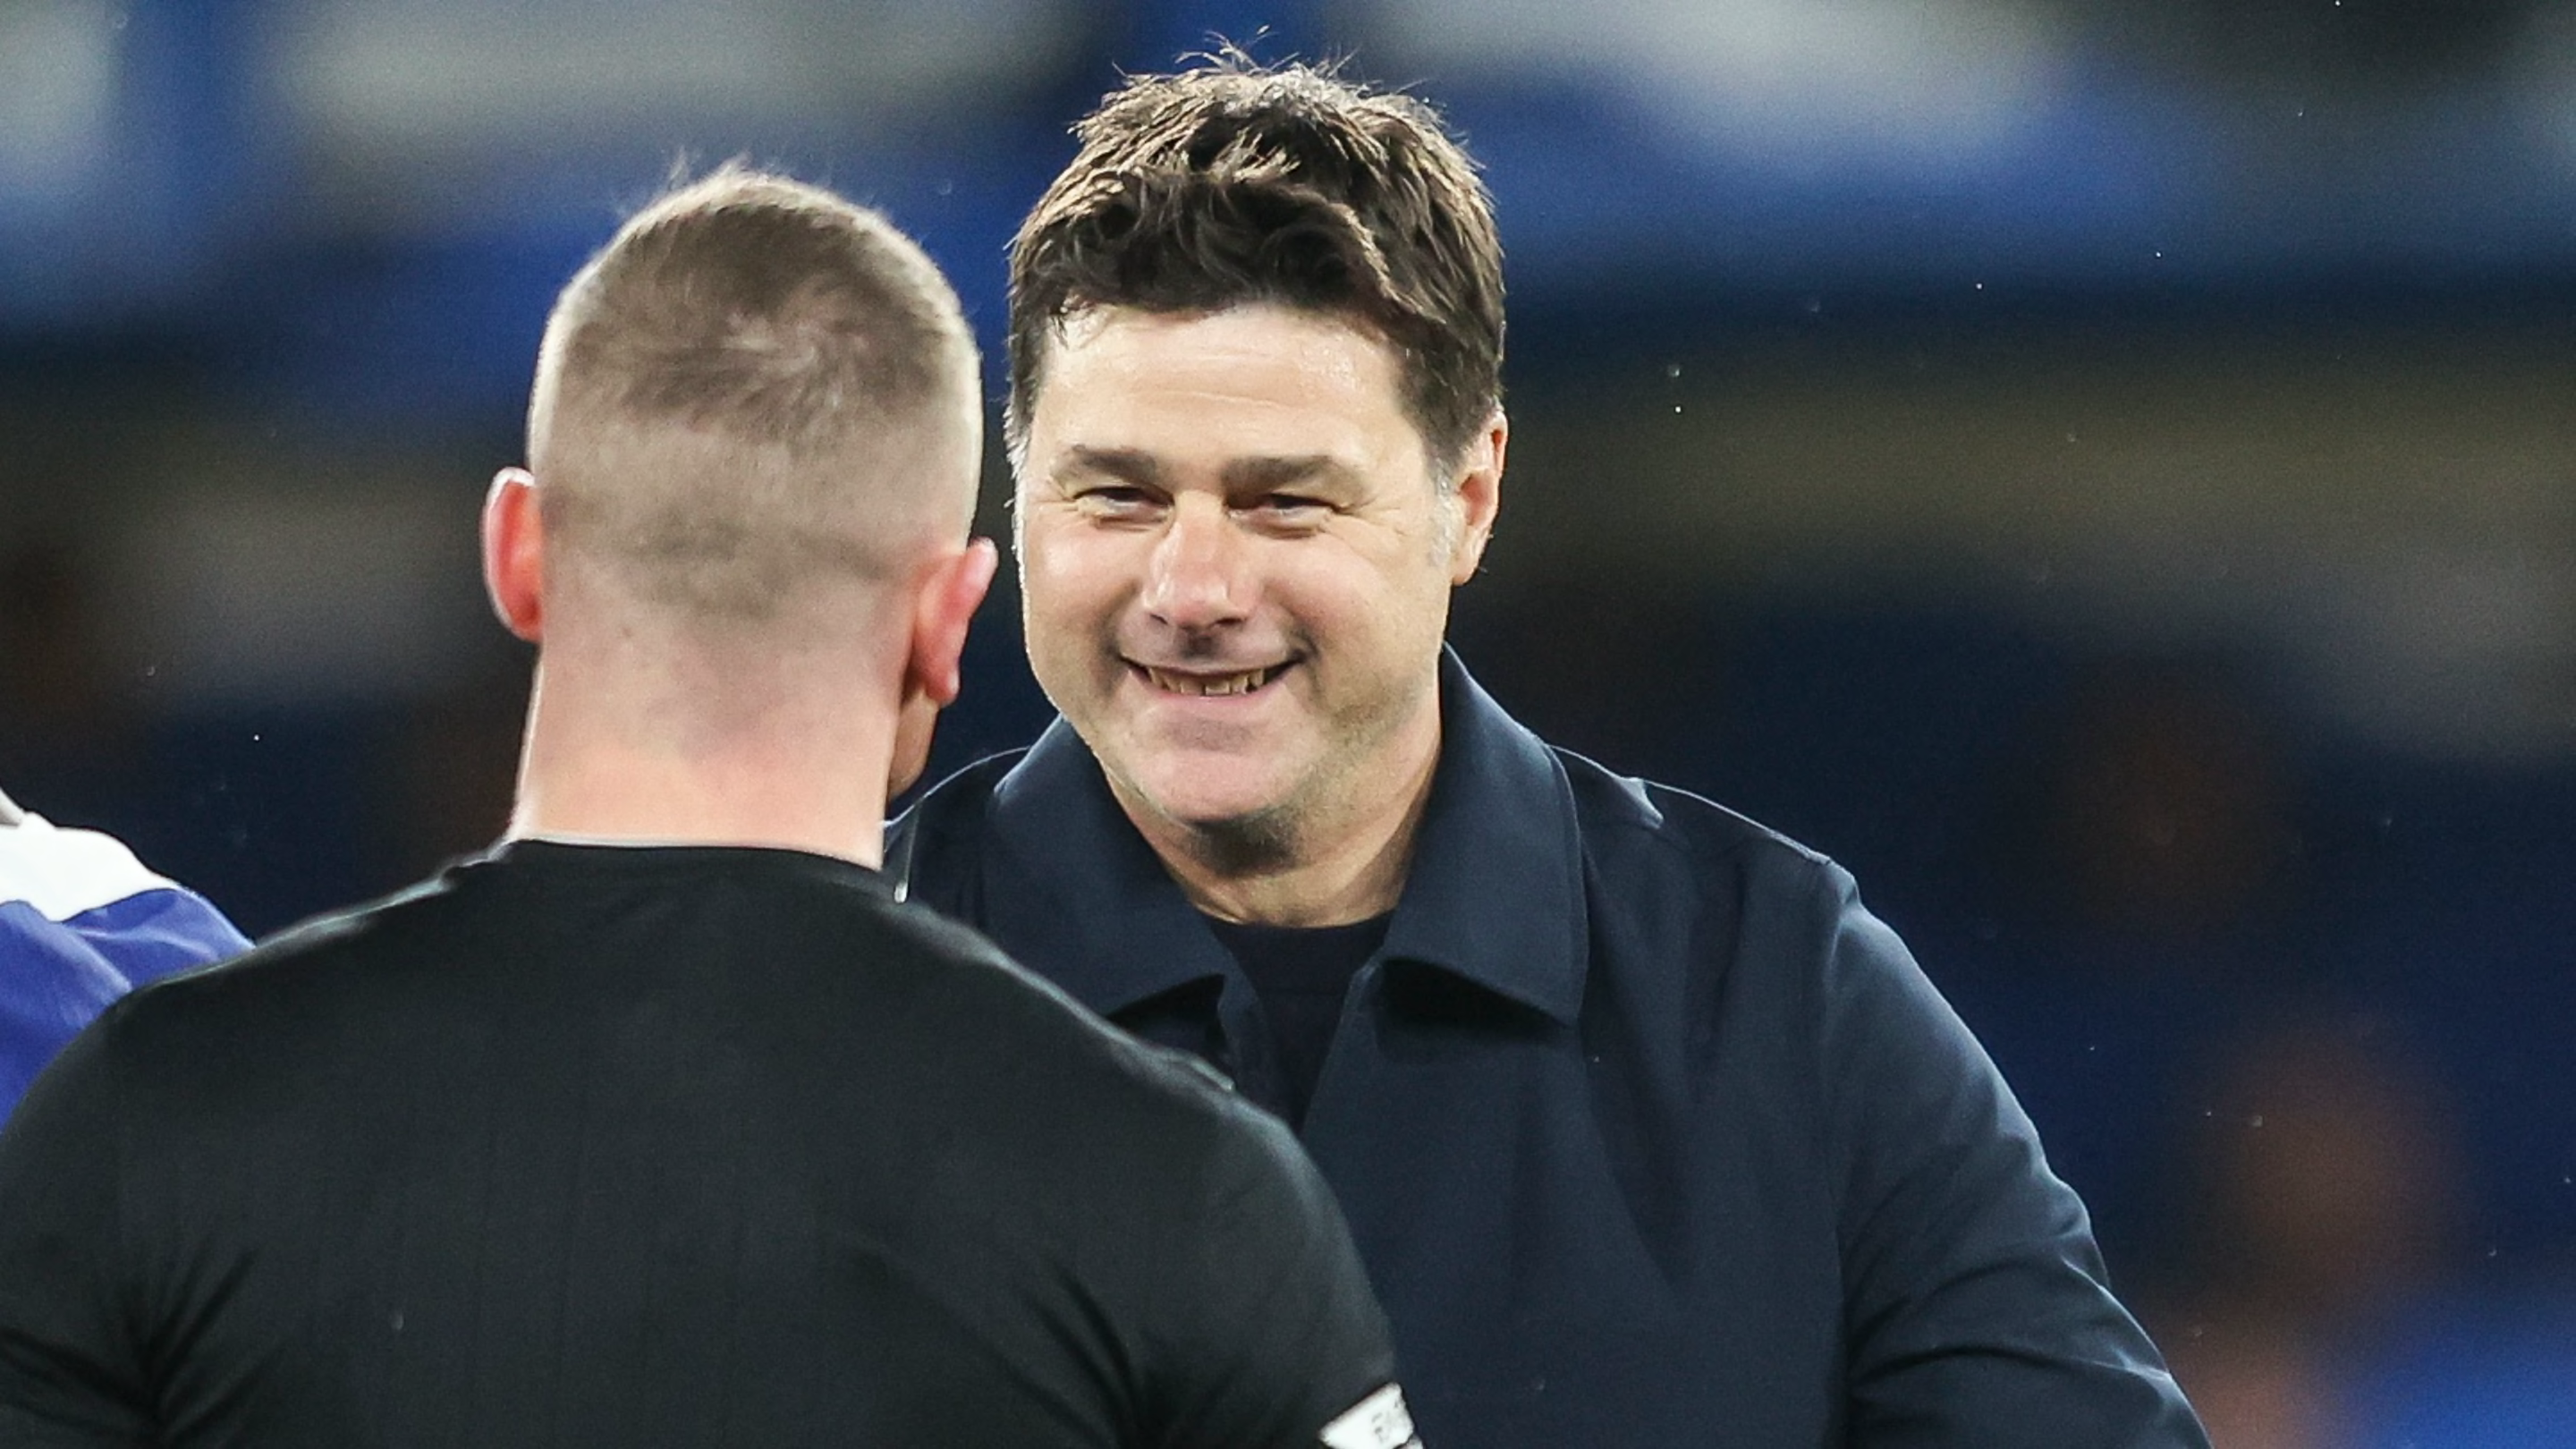 Mauricio Pochettino unimpressed by constant scrutiny and says 'enough is enough'